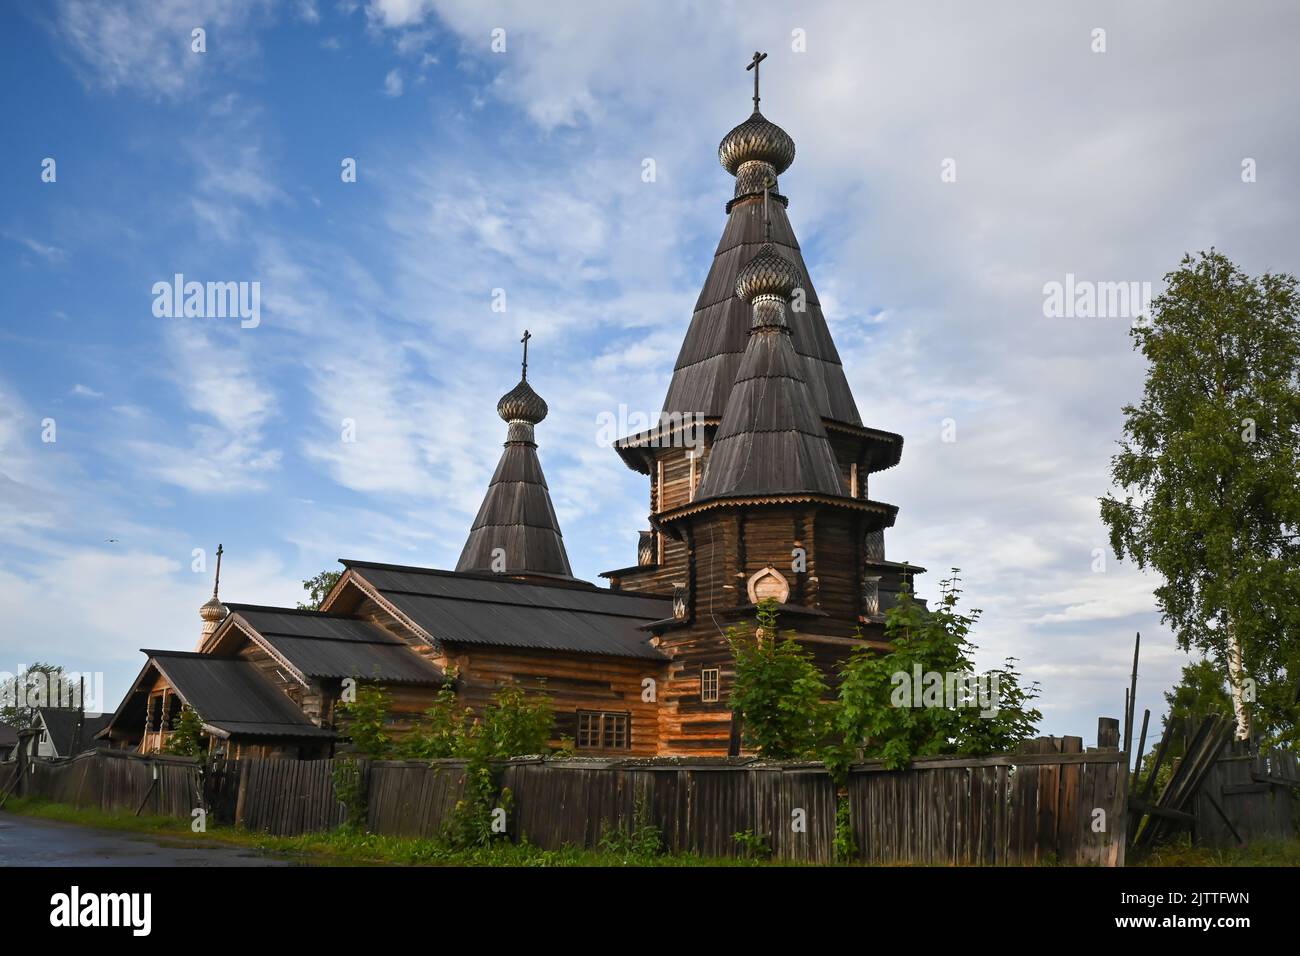 Wooden Orthodox church. Church of the Assumption of the Blessed Virgin Mary in the city of Kem, Republic of Karelia, Russia. Stock Photo